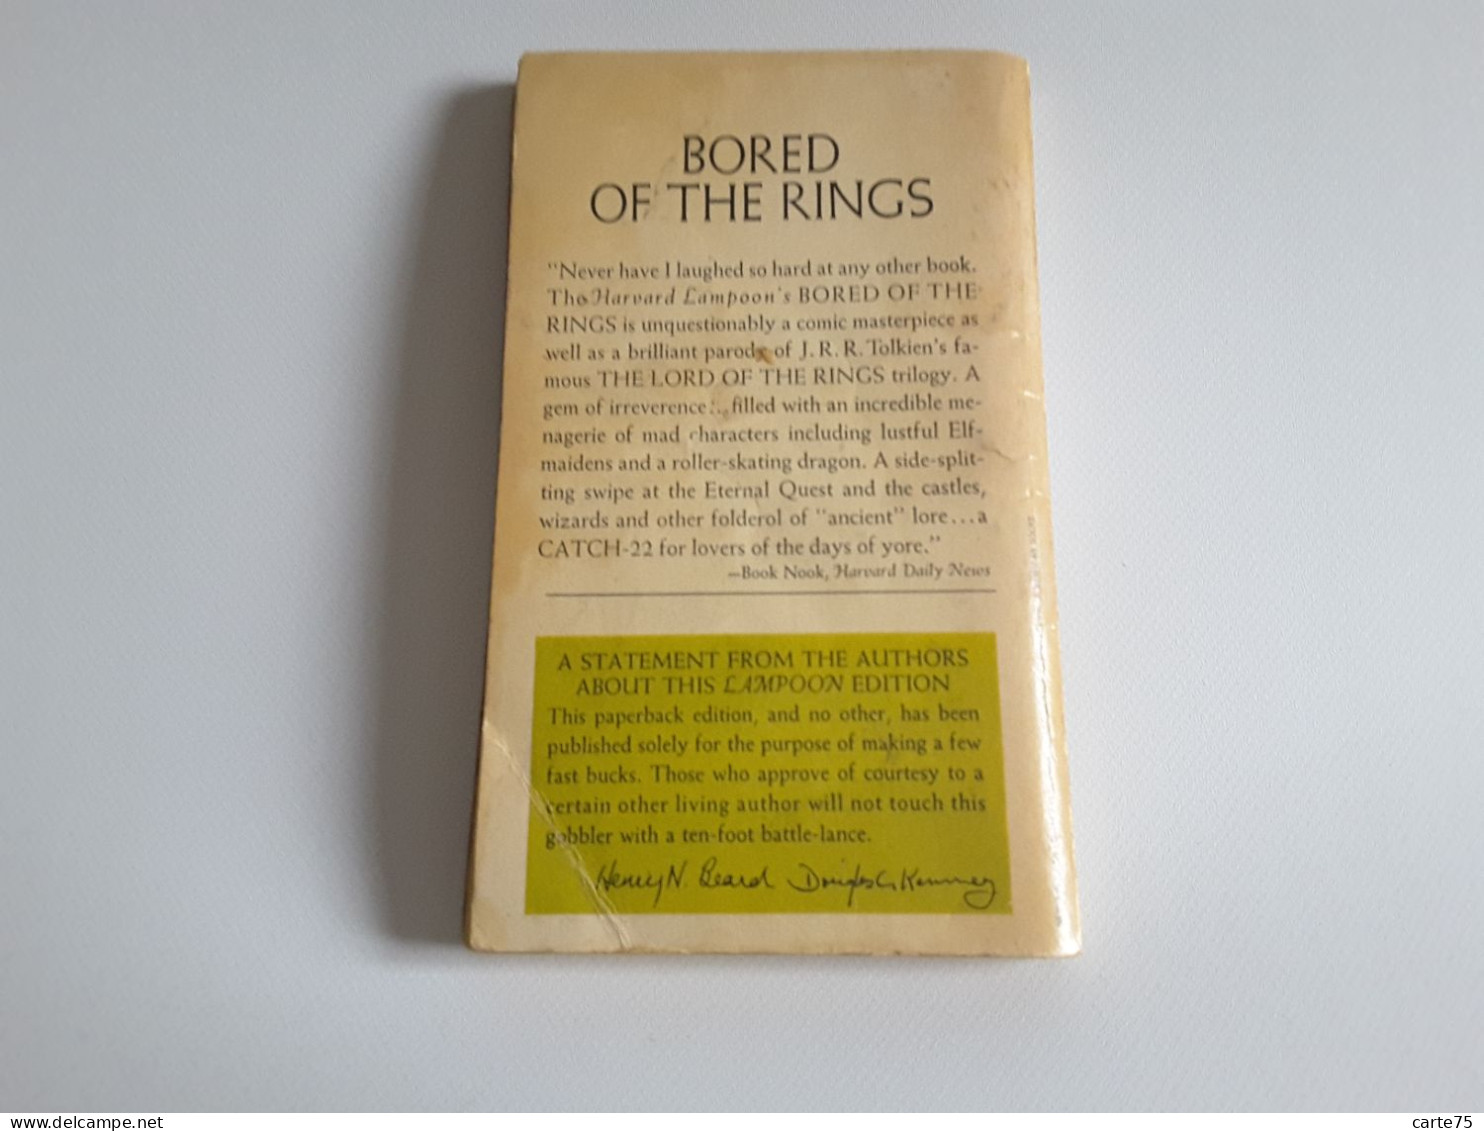 1969 First Printing Of Bored Of The Rings A Parody Of J.R.R. Tolkien's Lord Of The Rings By Harvard Lampoon Parodie LOTR - Humour